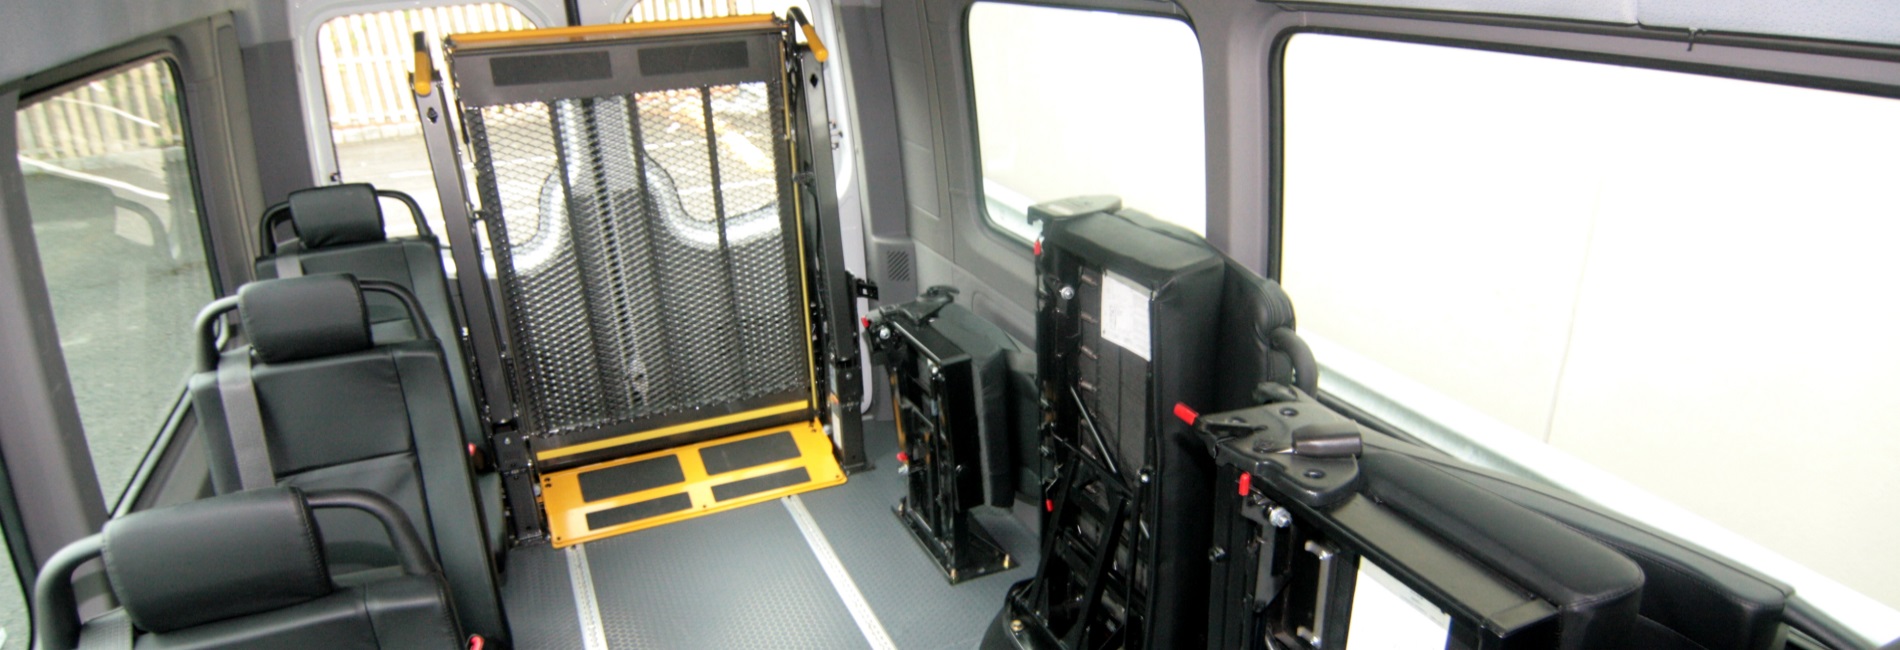 HQ has a number of solutions for mobility / paratransit shuttle transportation needs.